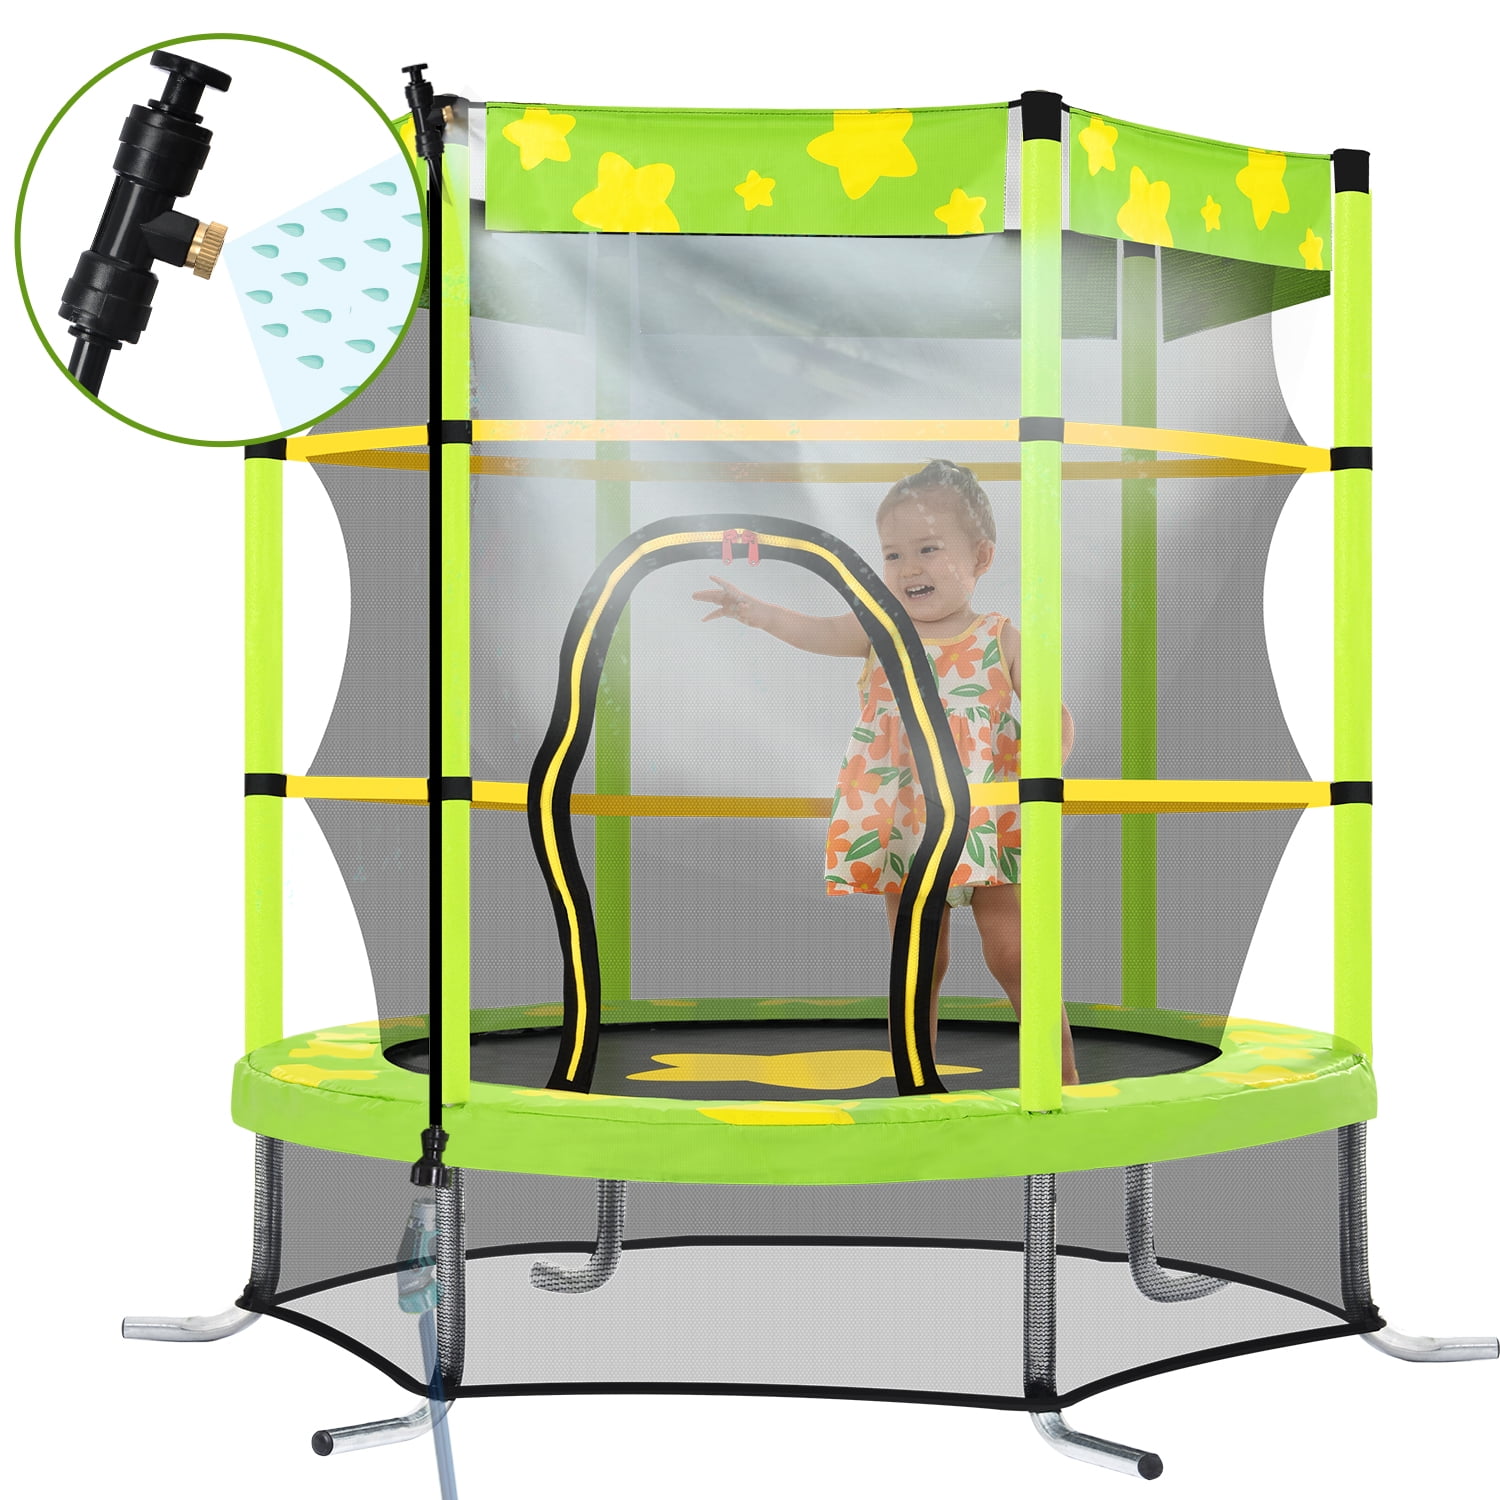 Kids Trampoline for Toddlers with Net yellow 55in Toddler Trampoline 